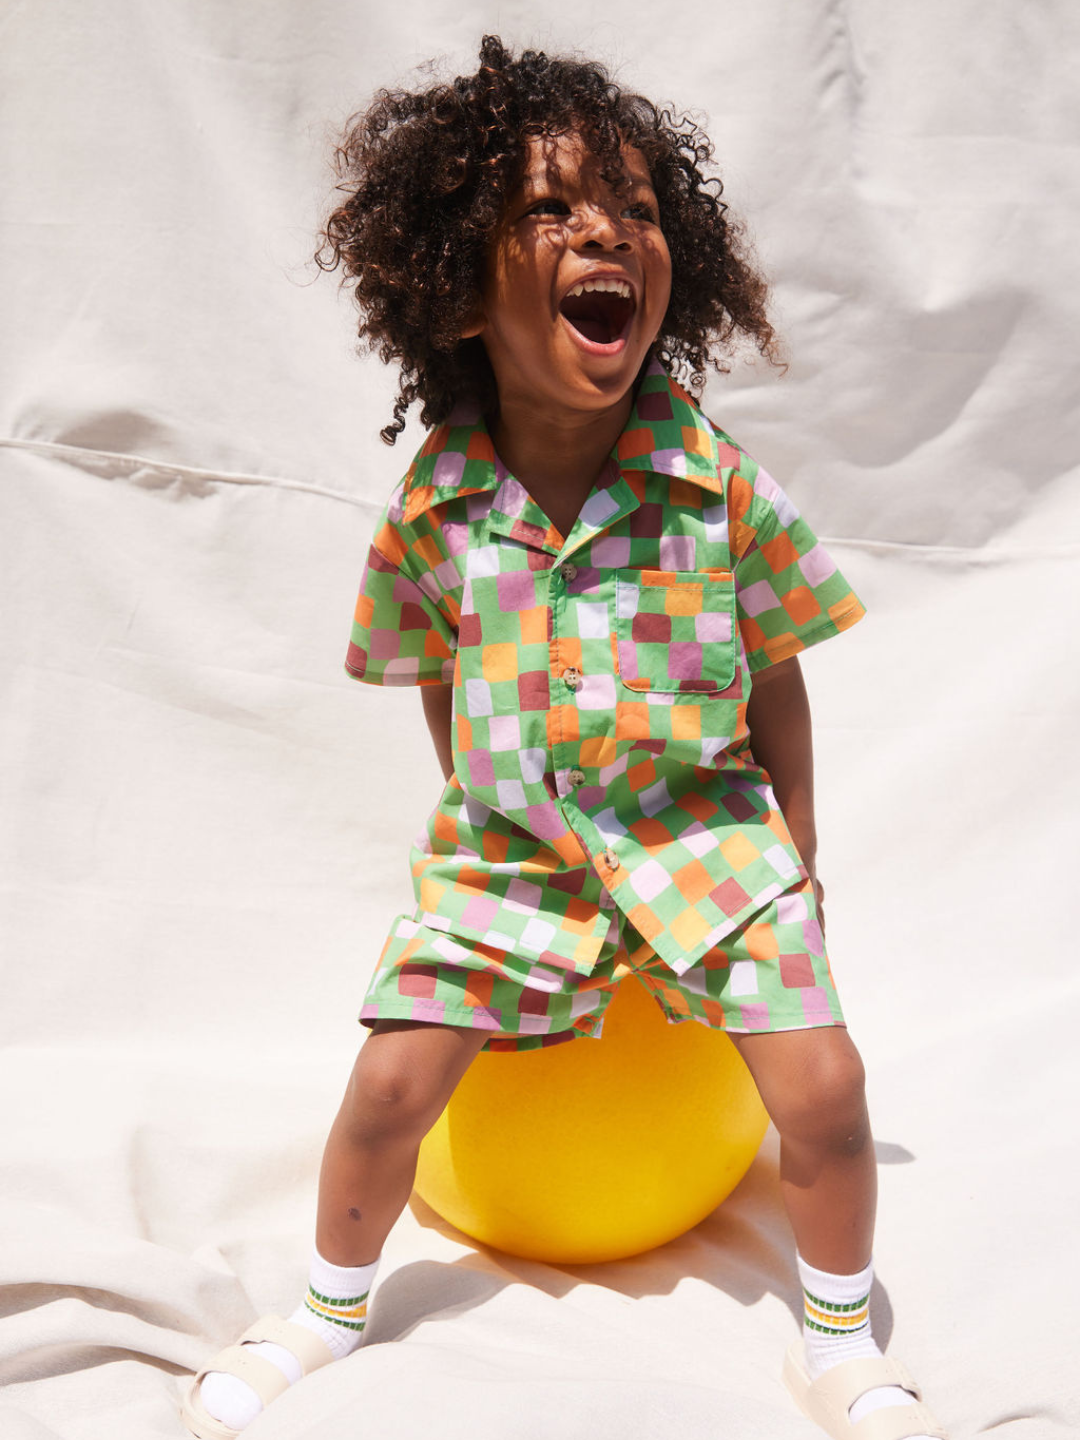 A child sitting on a ball, wearing a kids' shirt and shorts set in a pattern of purple, prink, gold and orange squares on a green background